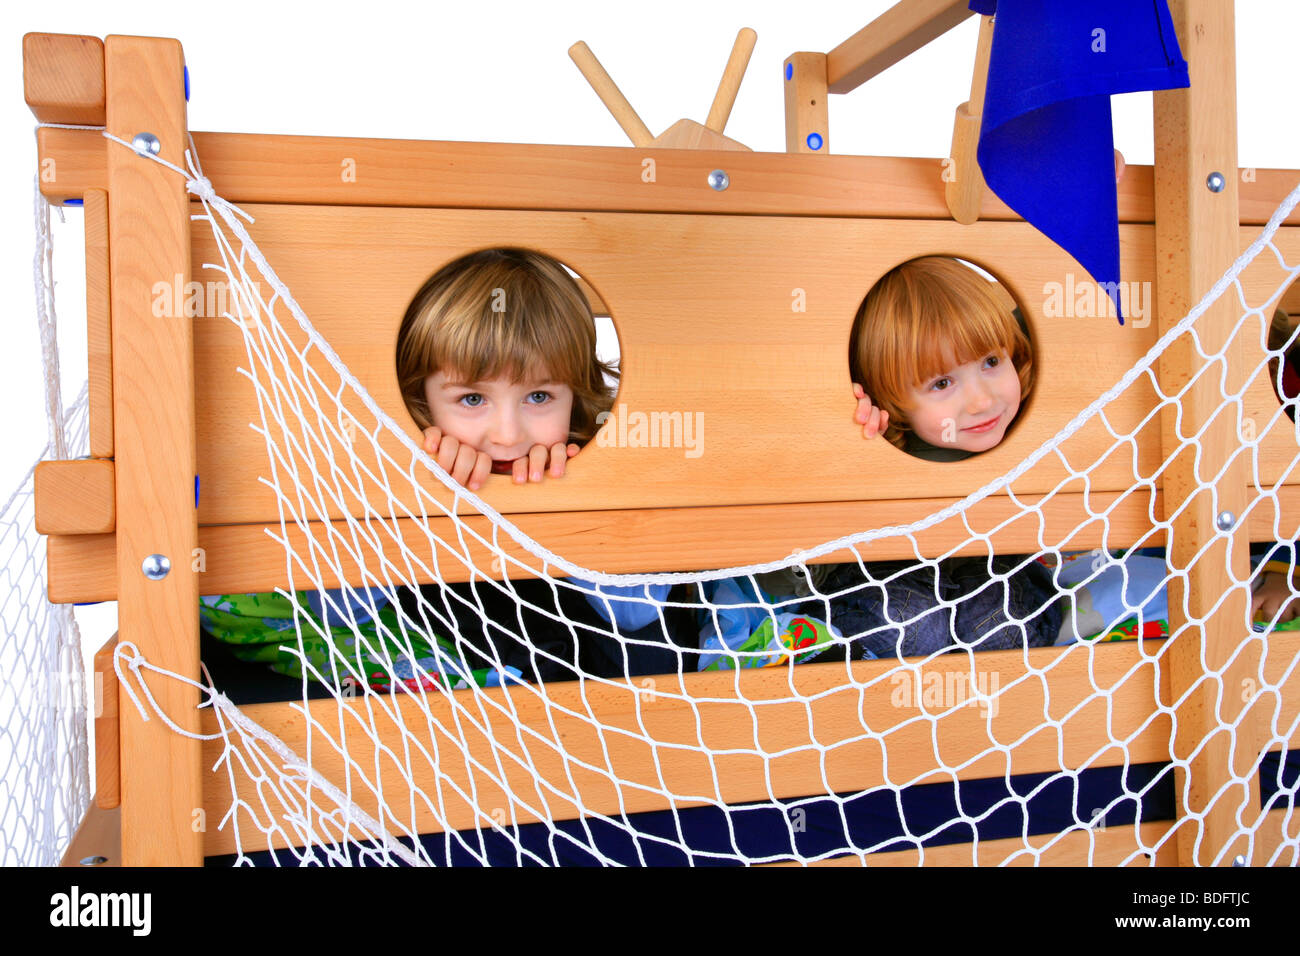 children playing in a Billi-Bolli loft bed, looking through holes Stock Photo